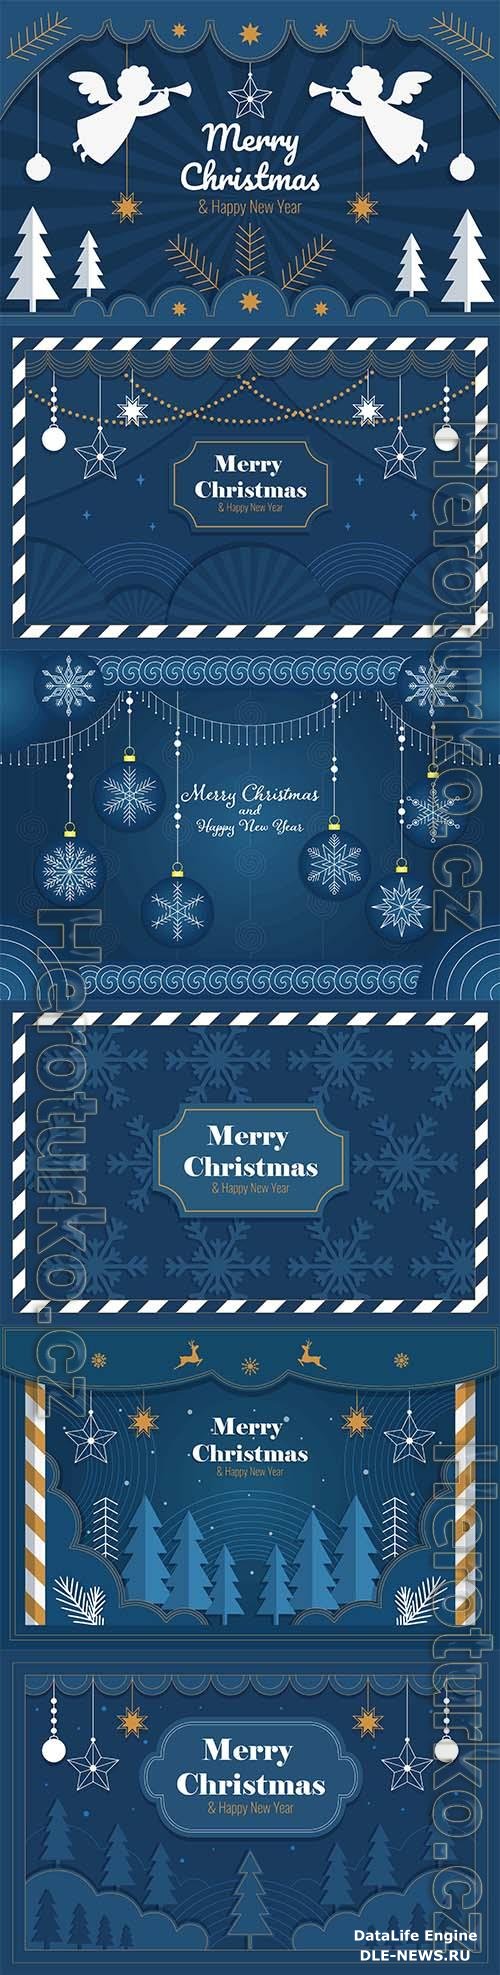 Merry christmas and happy new year banner with toys snowflakes and abstract objects